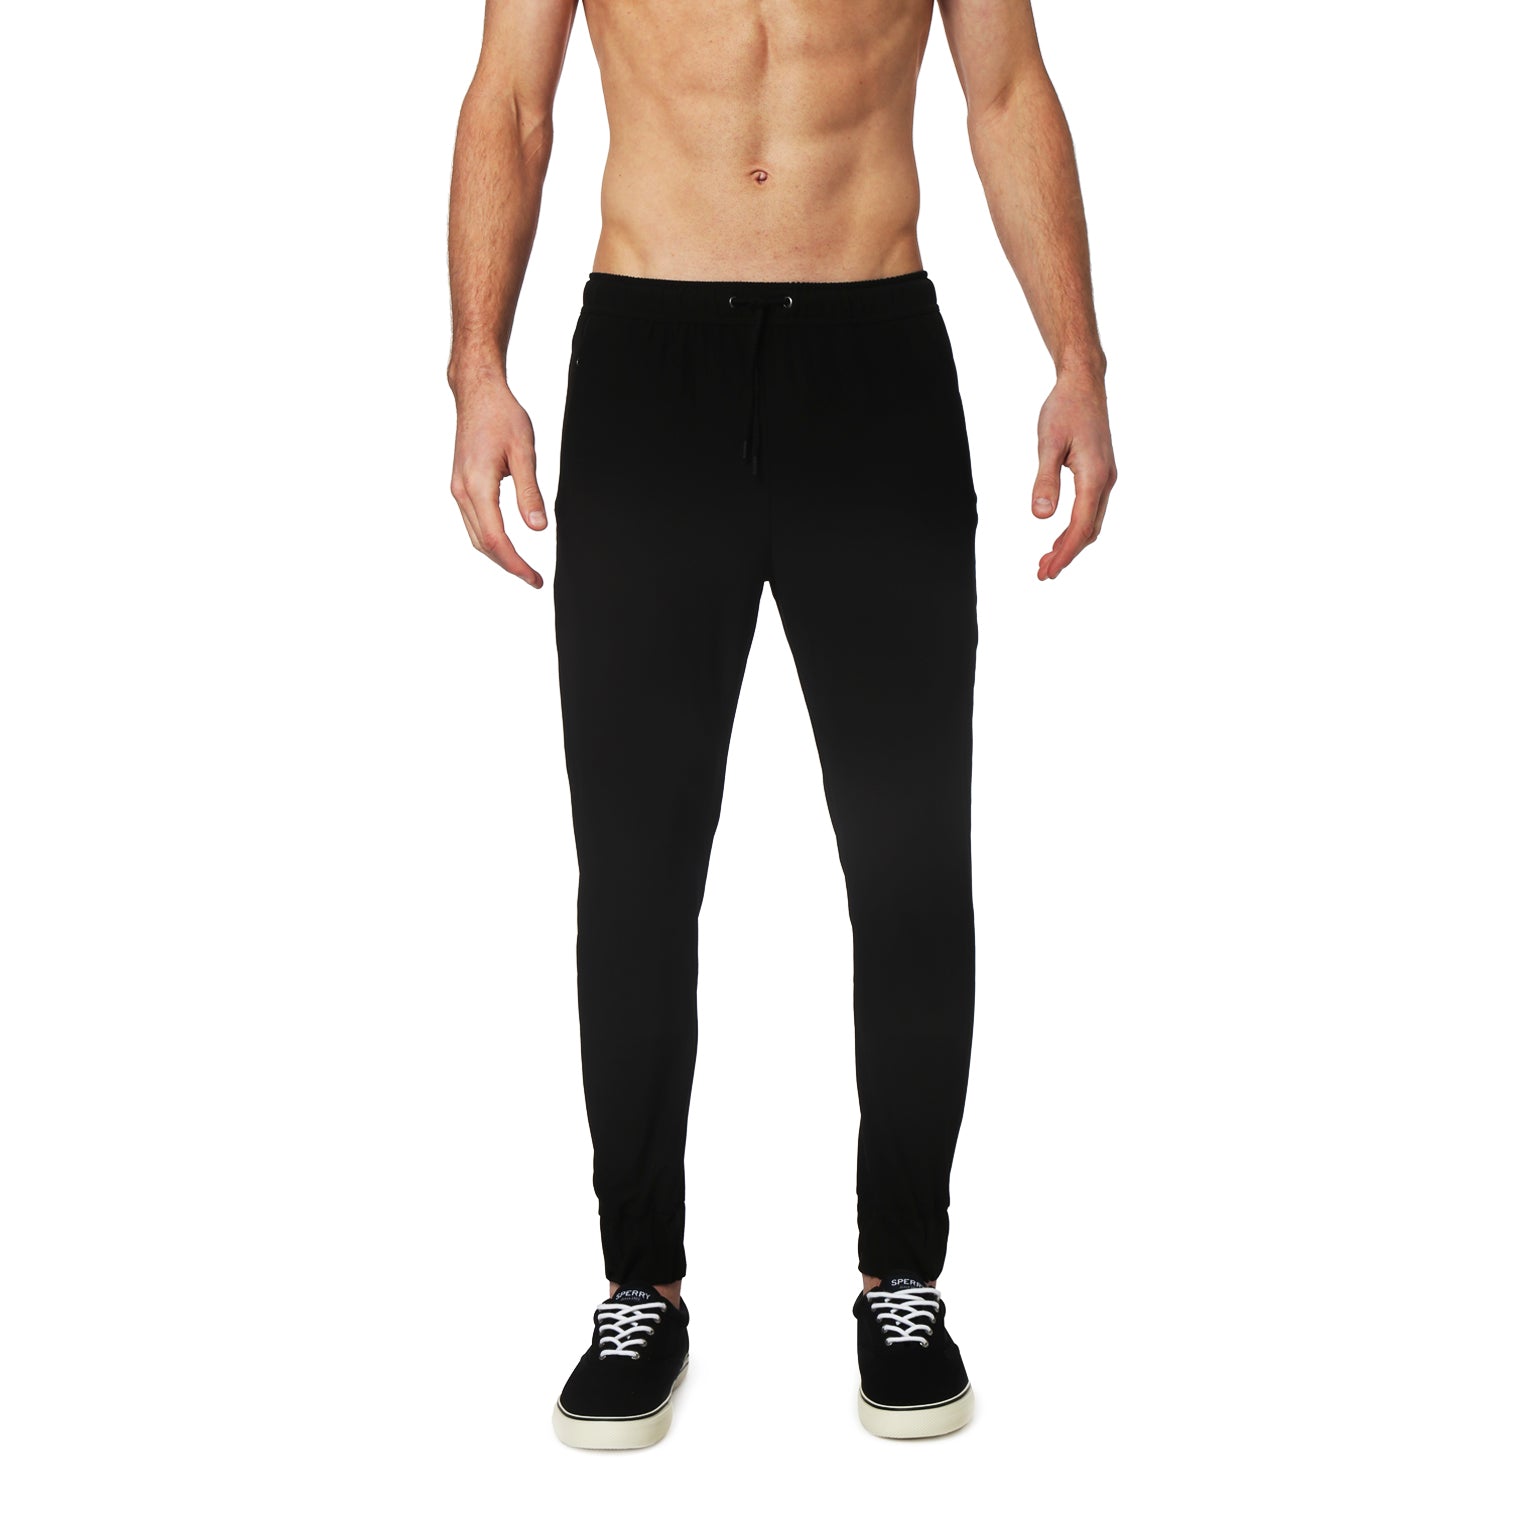 ACTIONWEAR- Black Solid Heather Stretch Lounge Pants